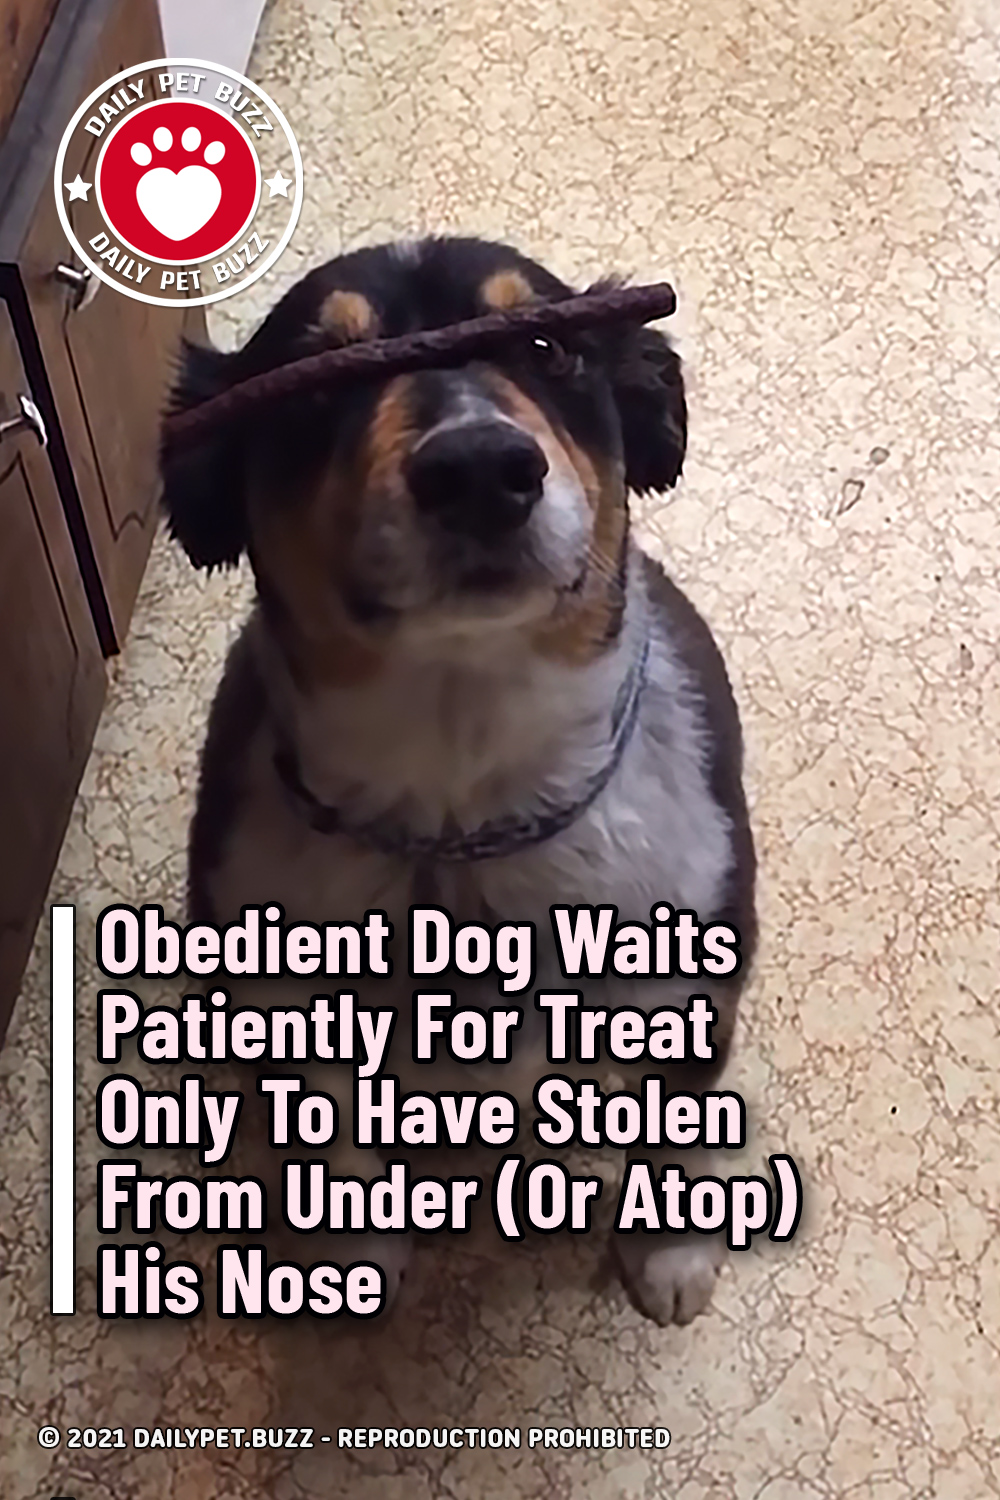 Obedient Dog Waits Patiently For Treat Only To Have It Stolen From Under (Or Atop) His Nose